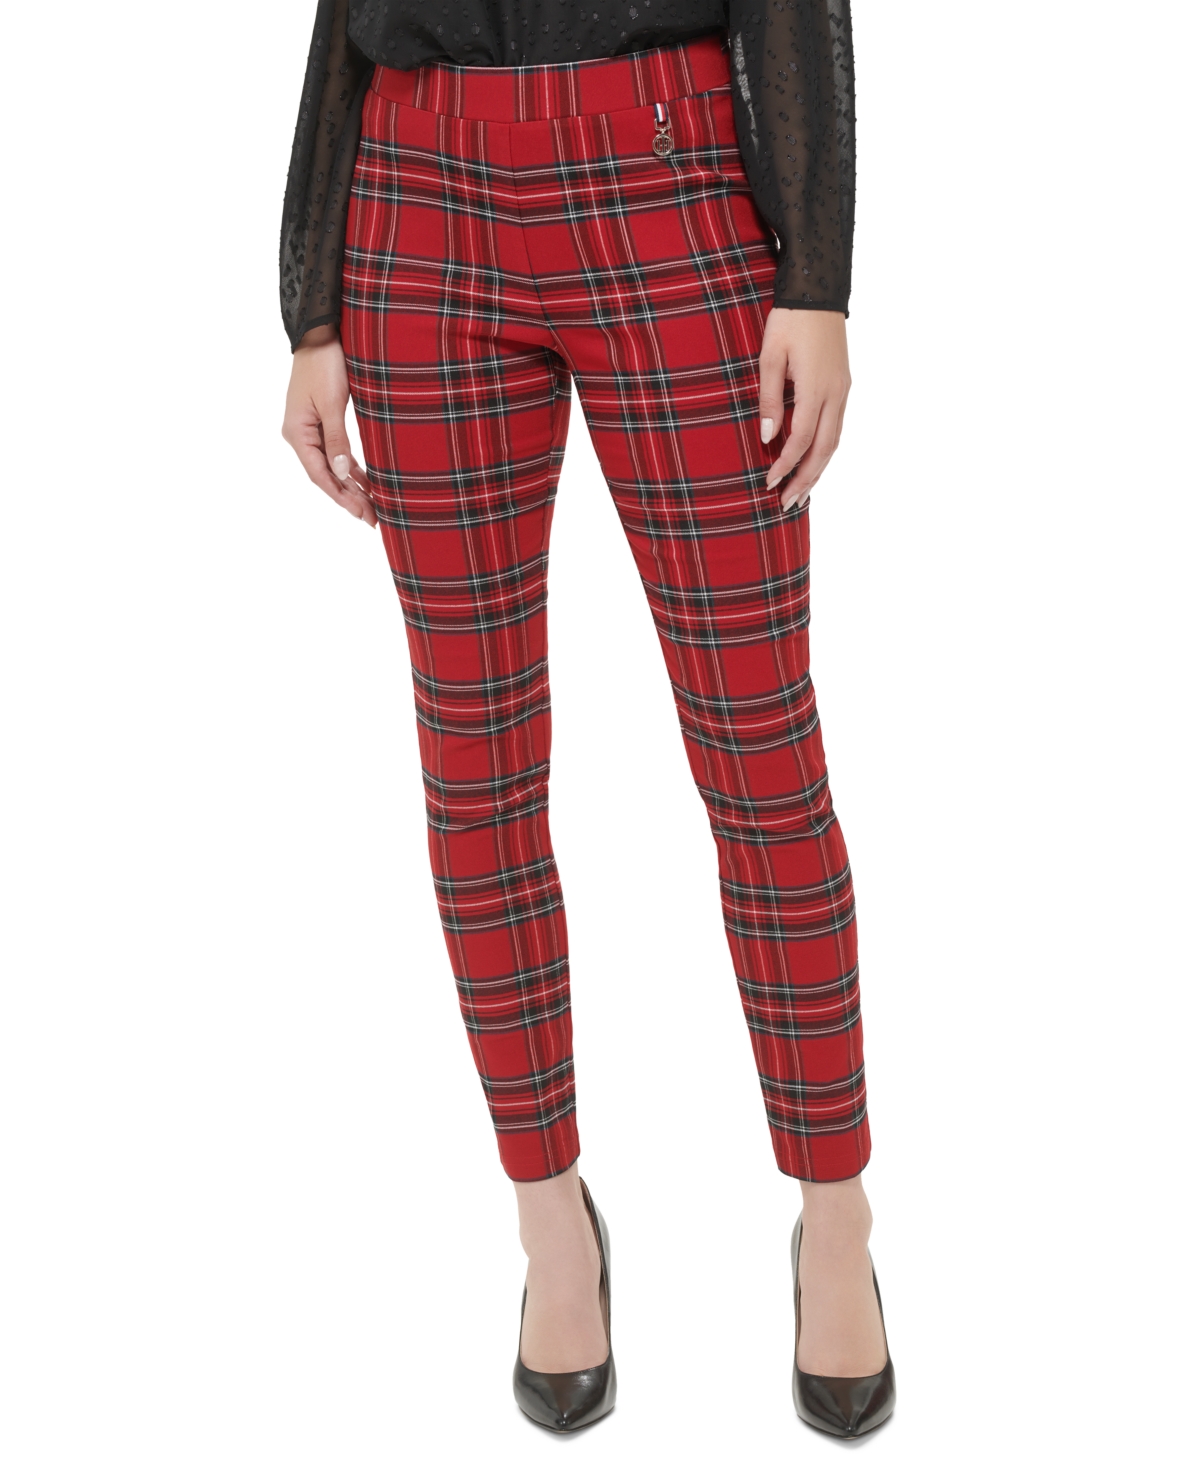 Tommy Hilfiger Women's Plaid Pull-On Mid-Rise Pants